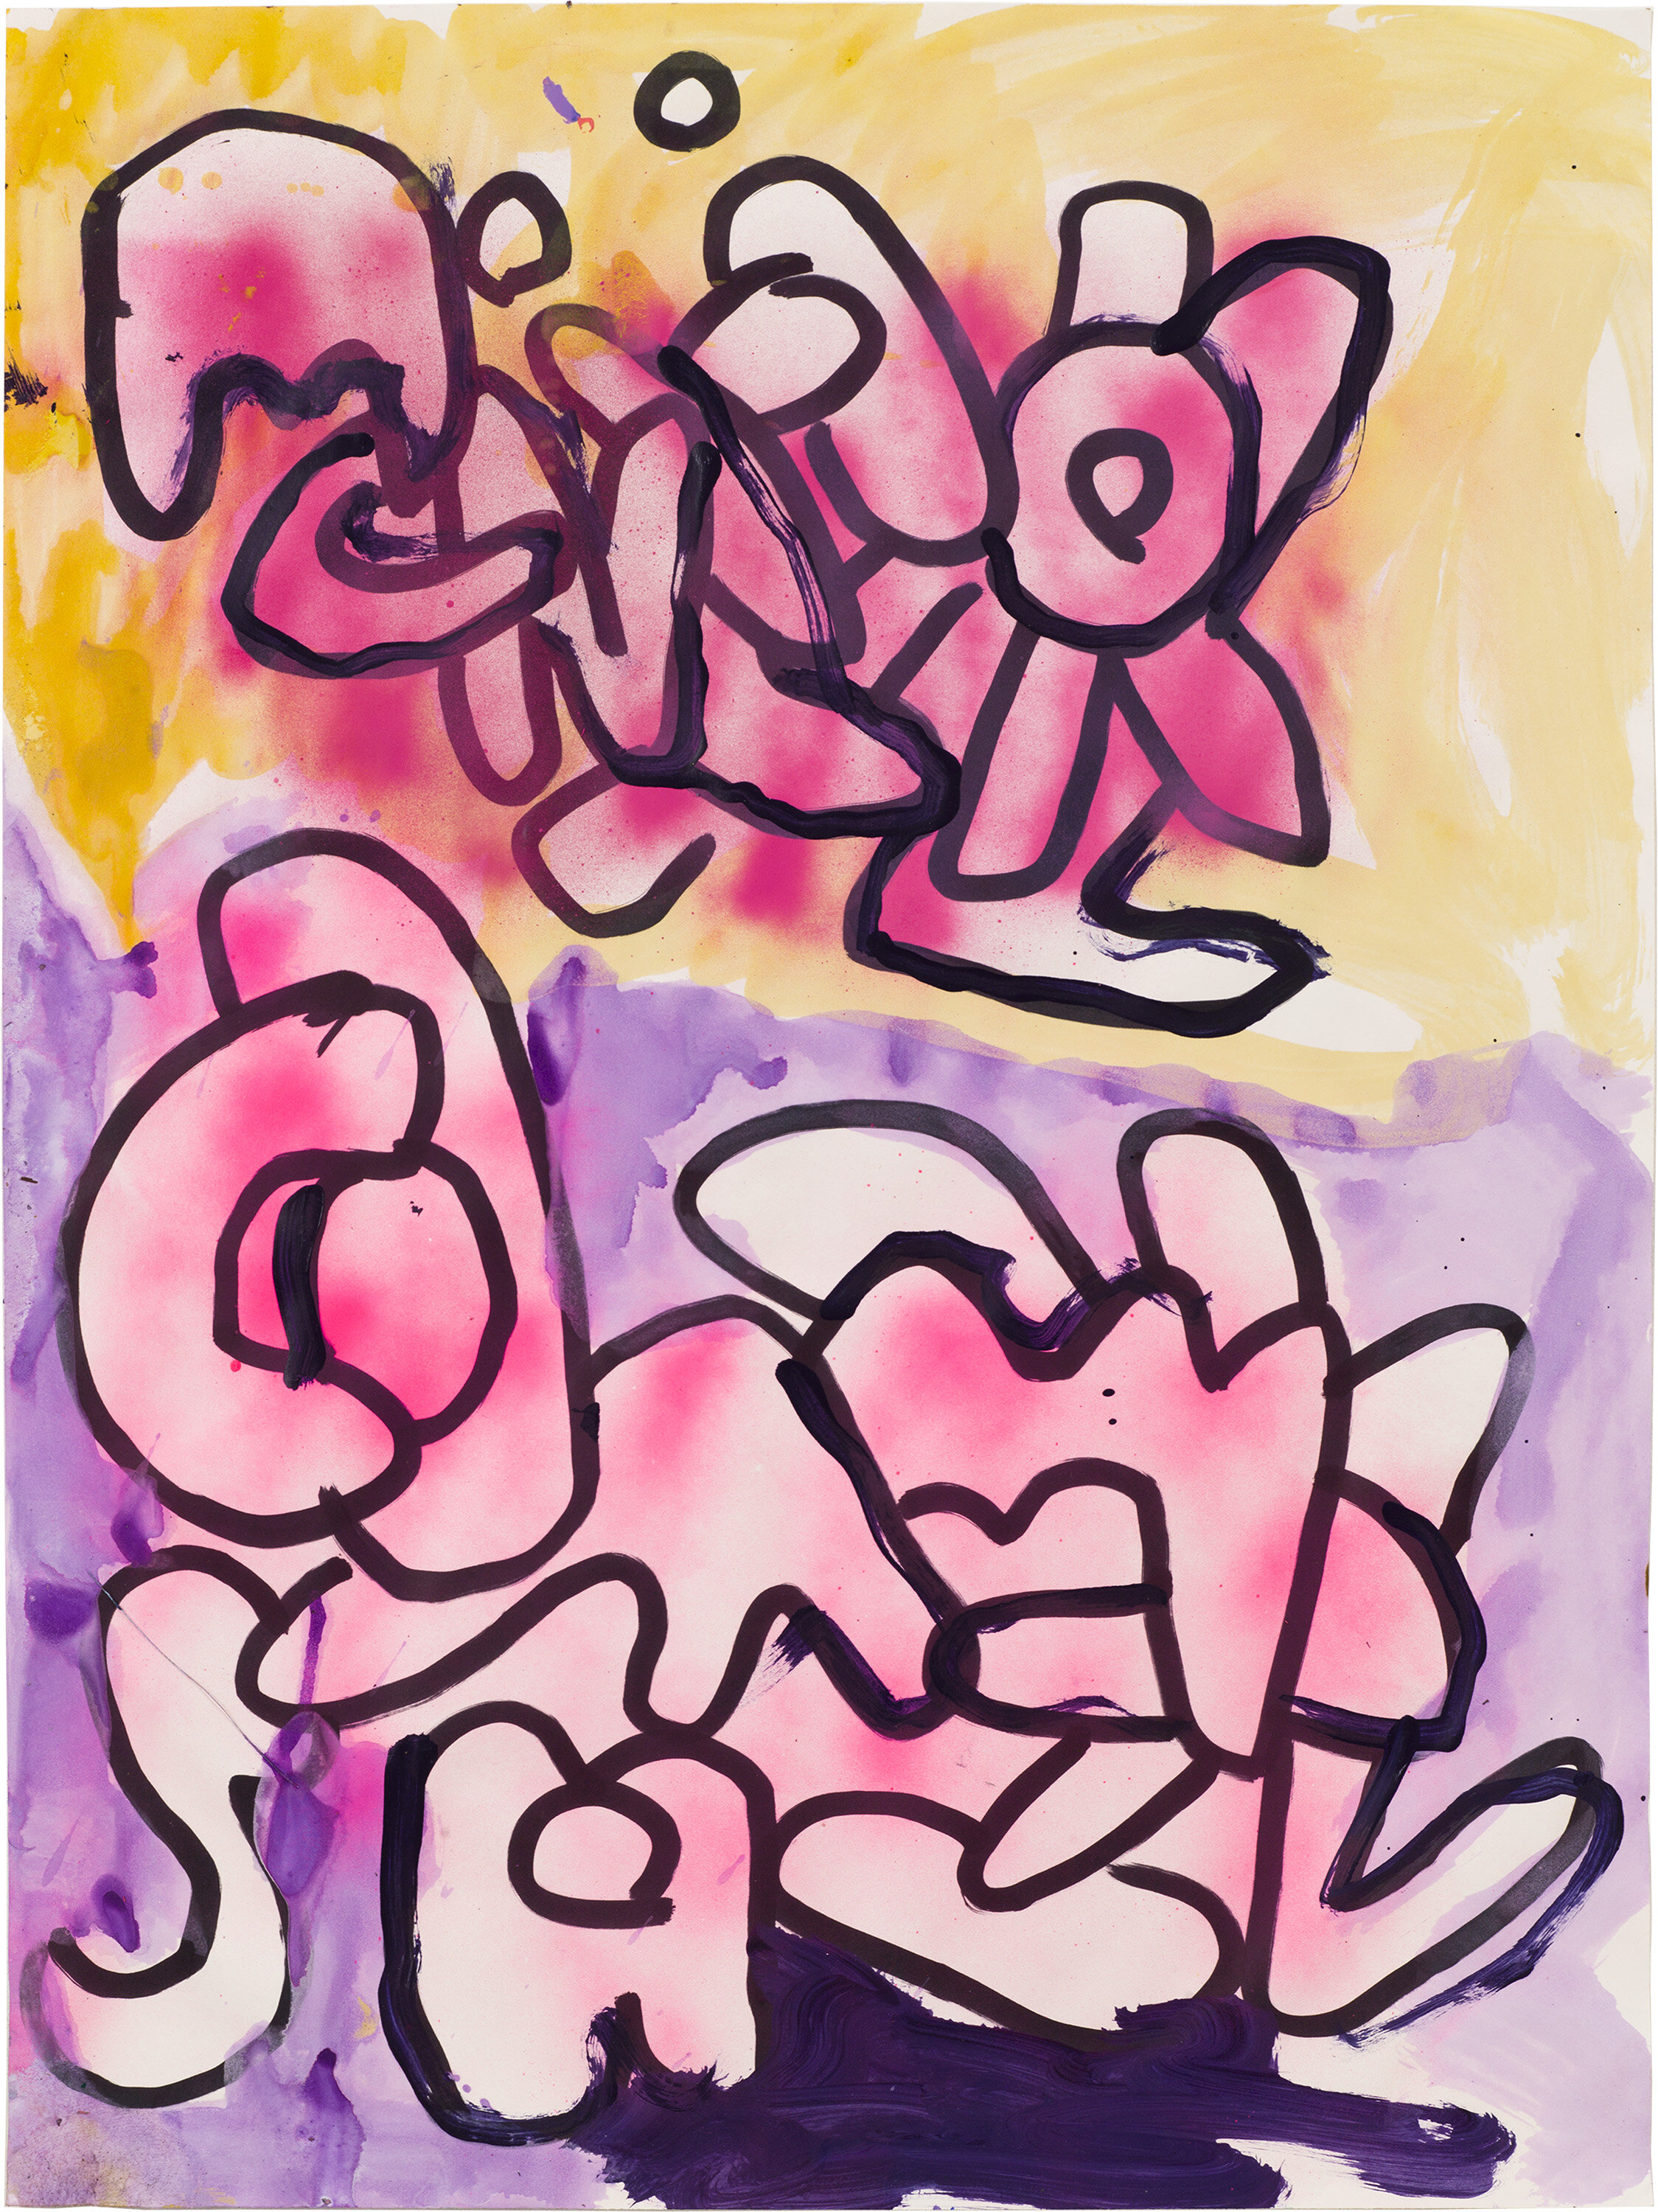  Drew Beattie and Ben Shepard   DBBS-DRW-2016-090   2016 acrylic, spray paint and marker on paper  24 x 18 inches 